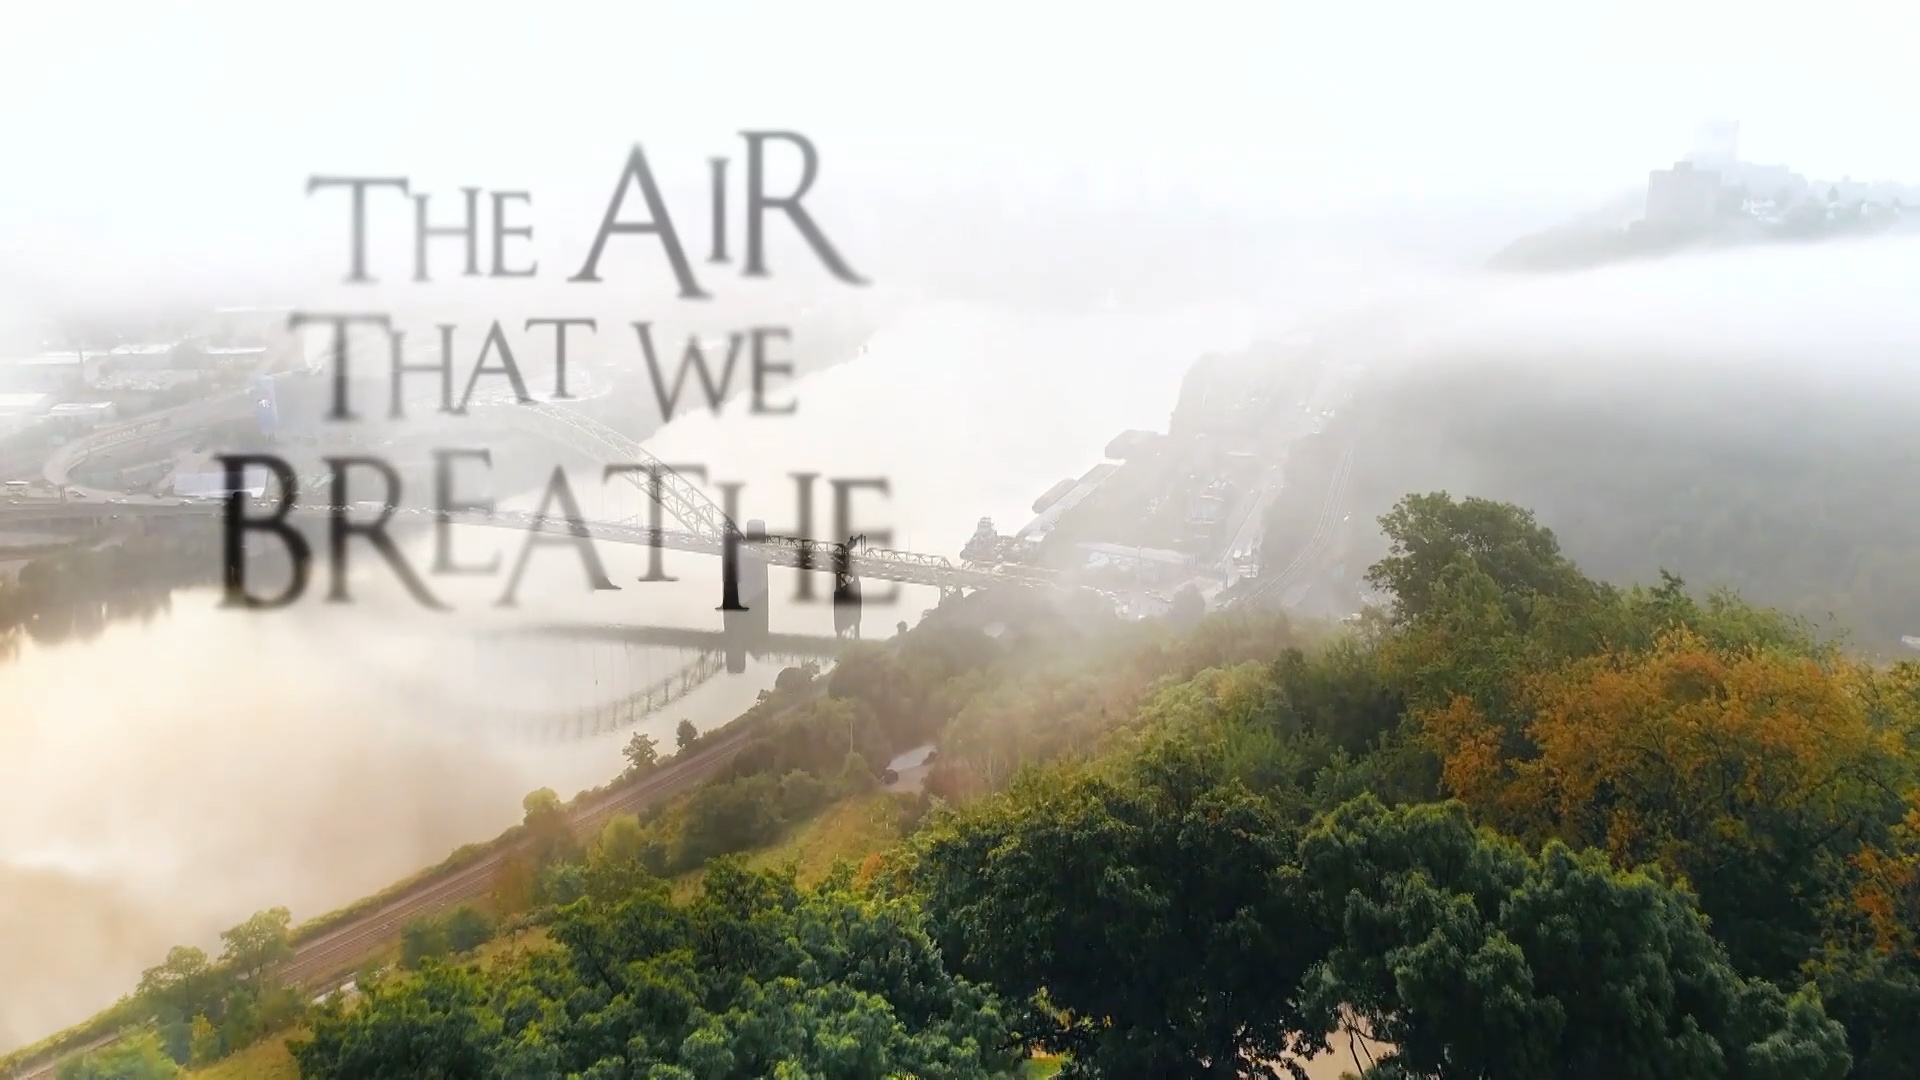 The Air that we Breathe part two